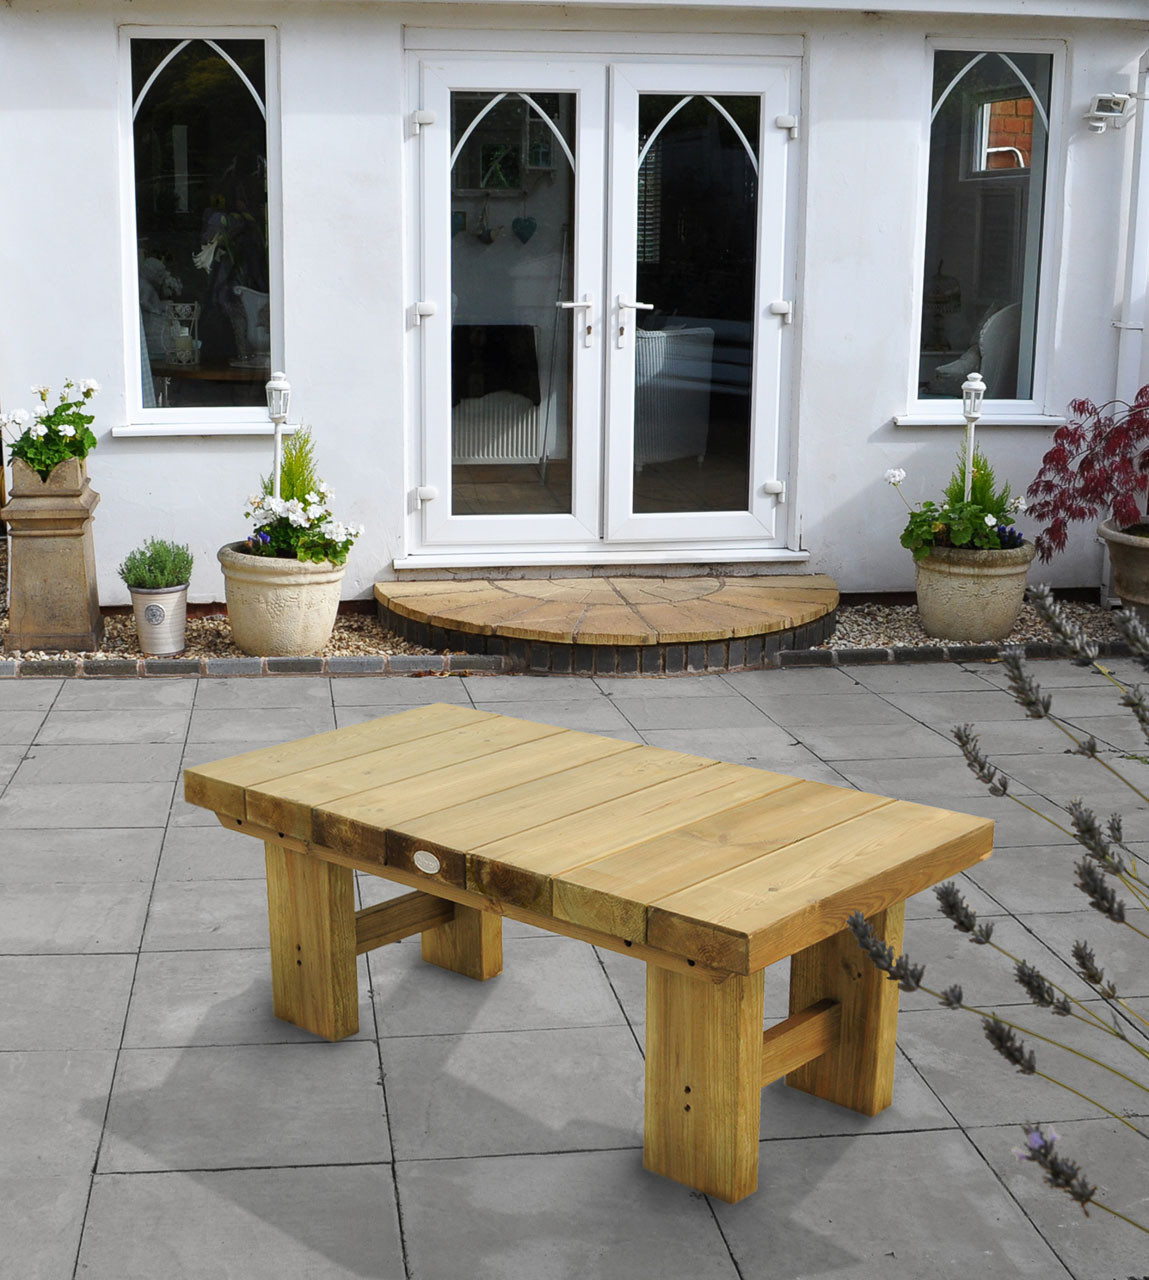 Photograph of Forest Garden Low Level Sleeper Table 130mm x 1225mm x 600mm